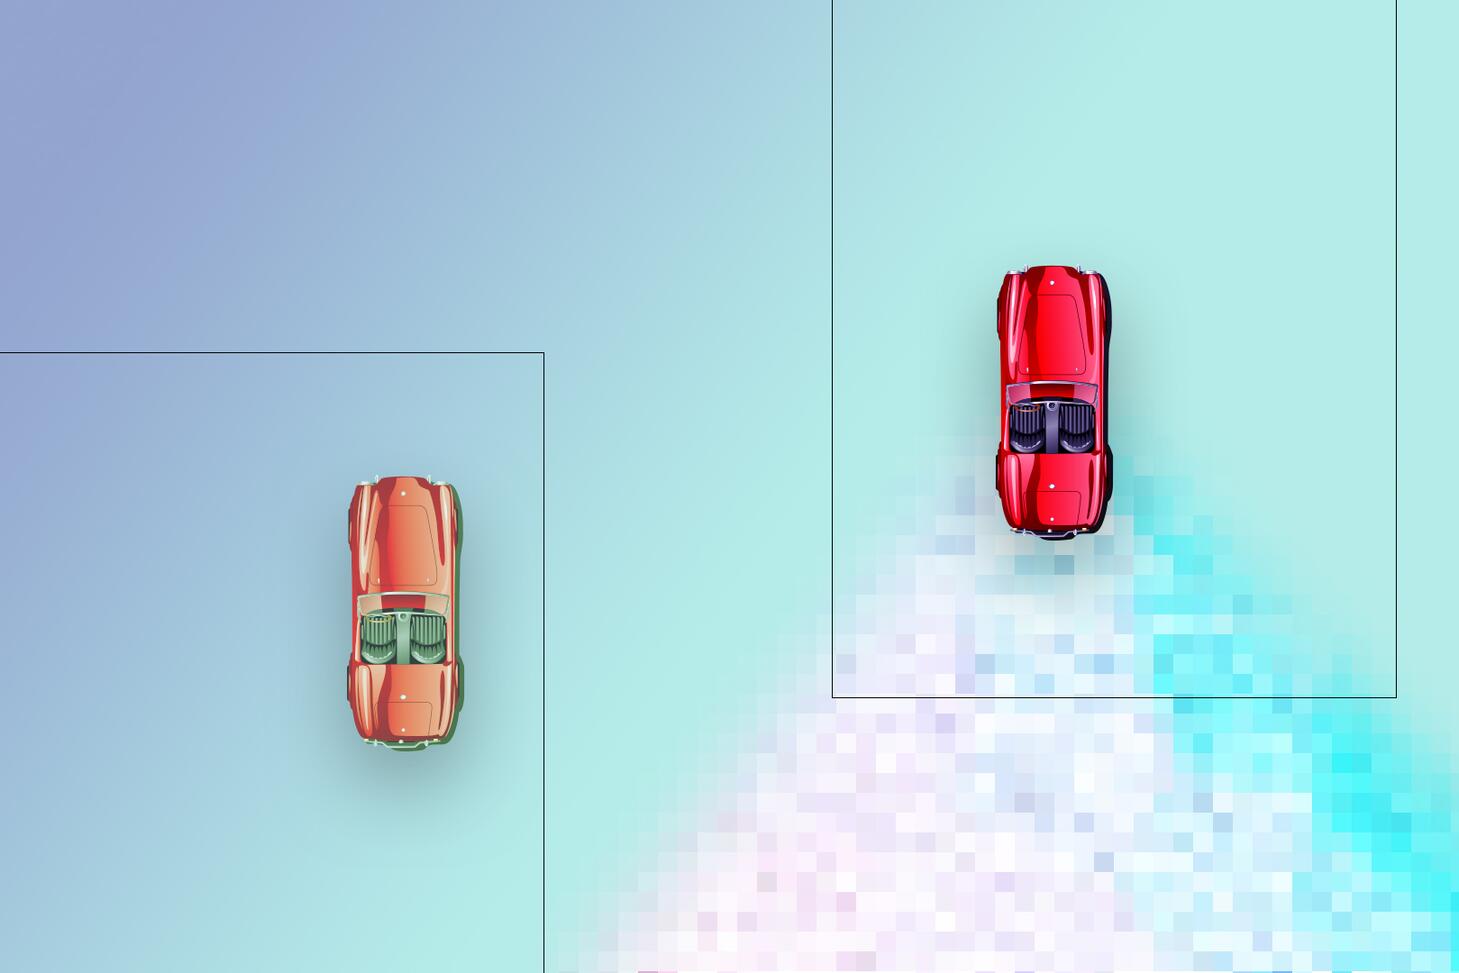 Two red car figurines, shown from overhead; one leaves behind it a white and aqua wake